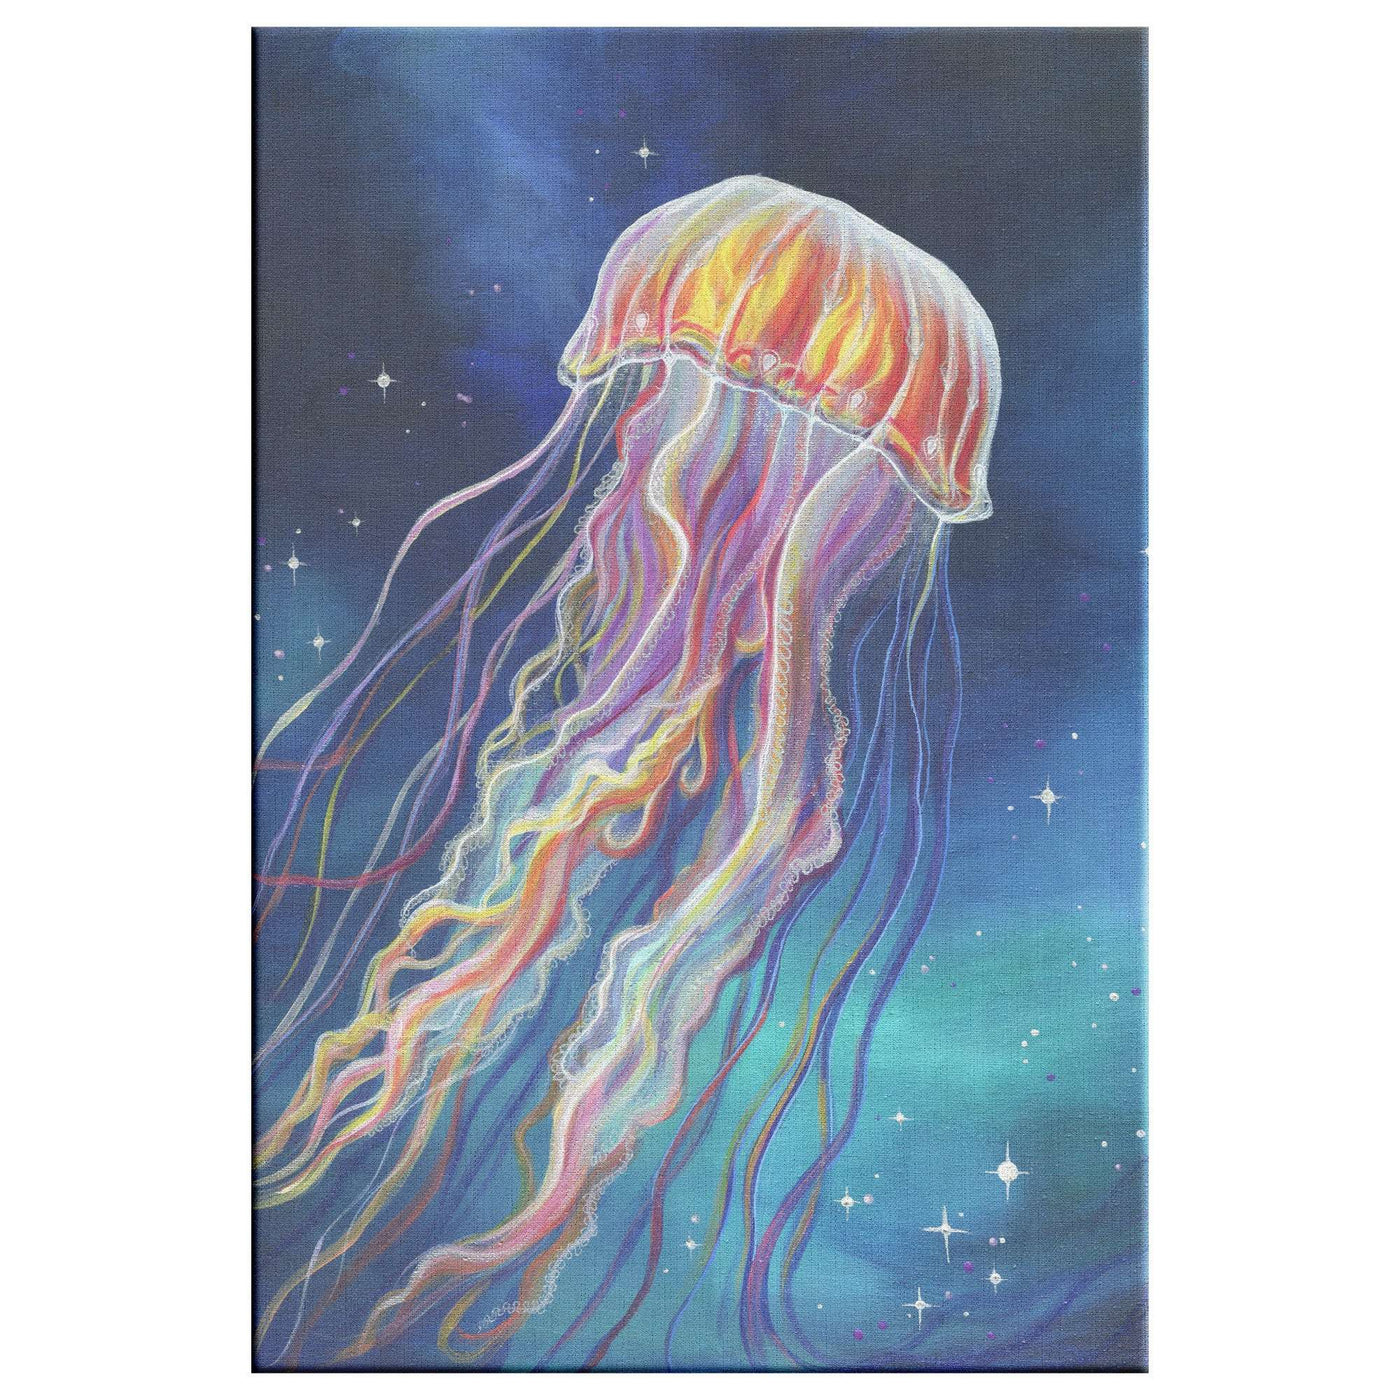 A vibrant Jellyfish Canvas Print with long, flowing tentacles against a dark blue background dotted with stars.